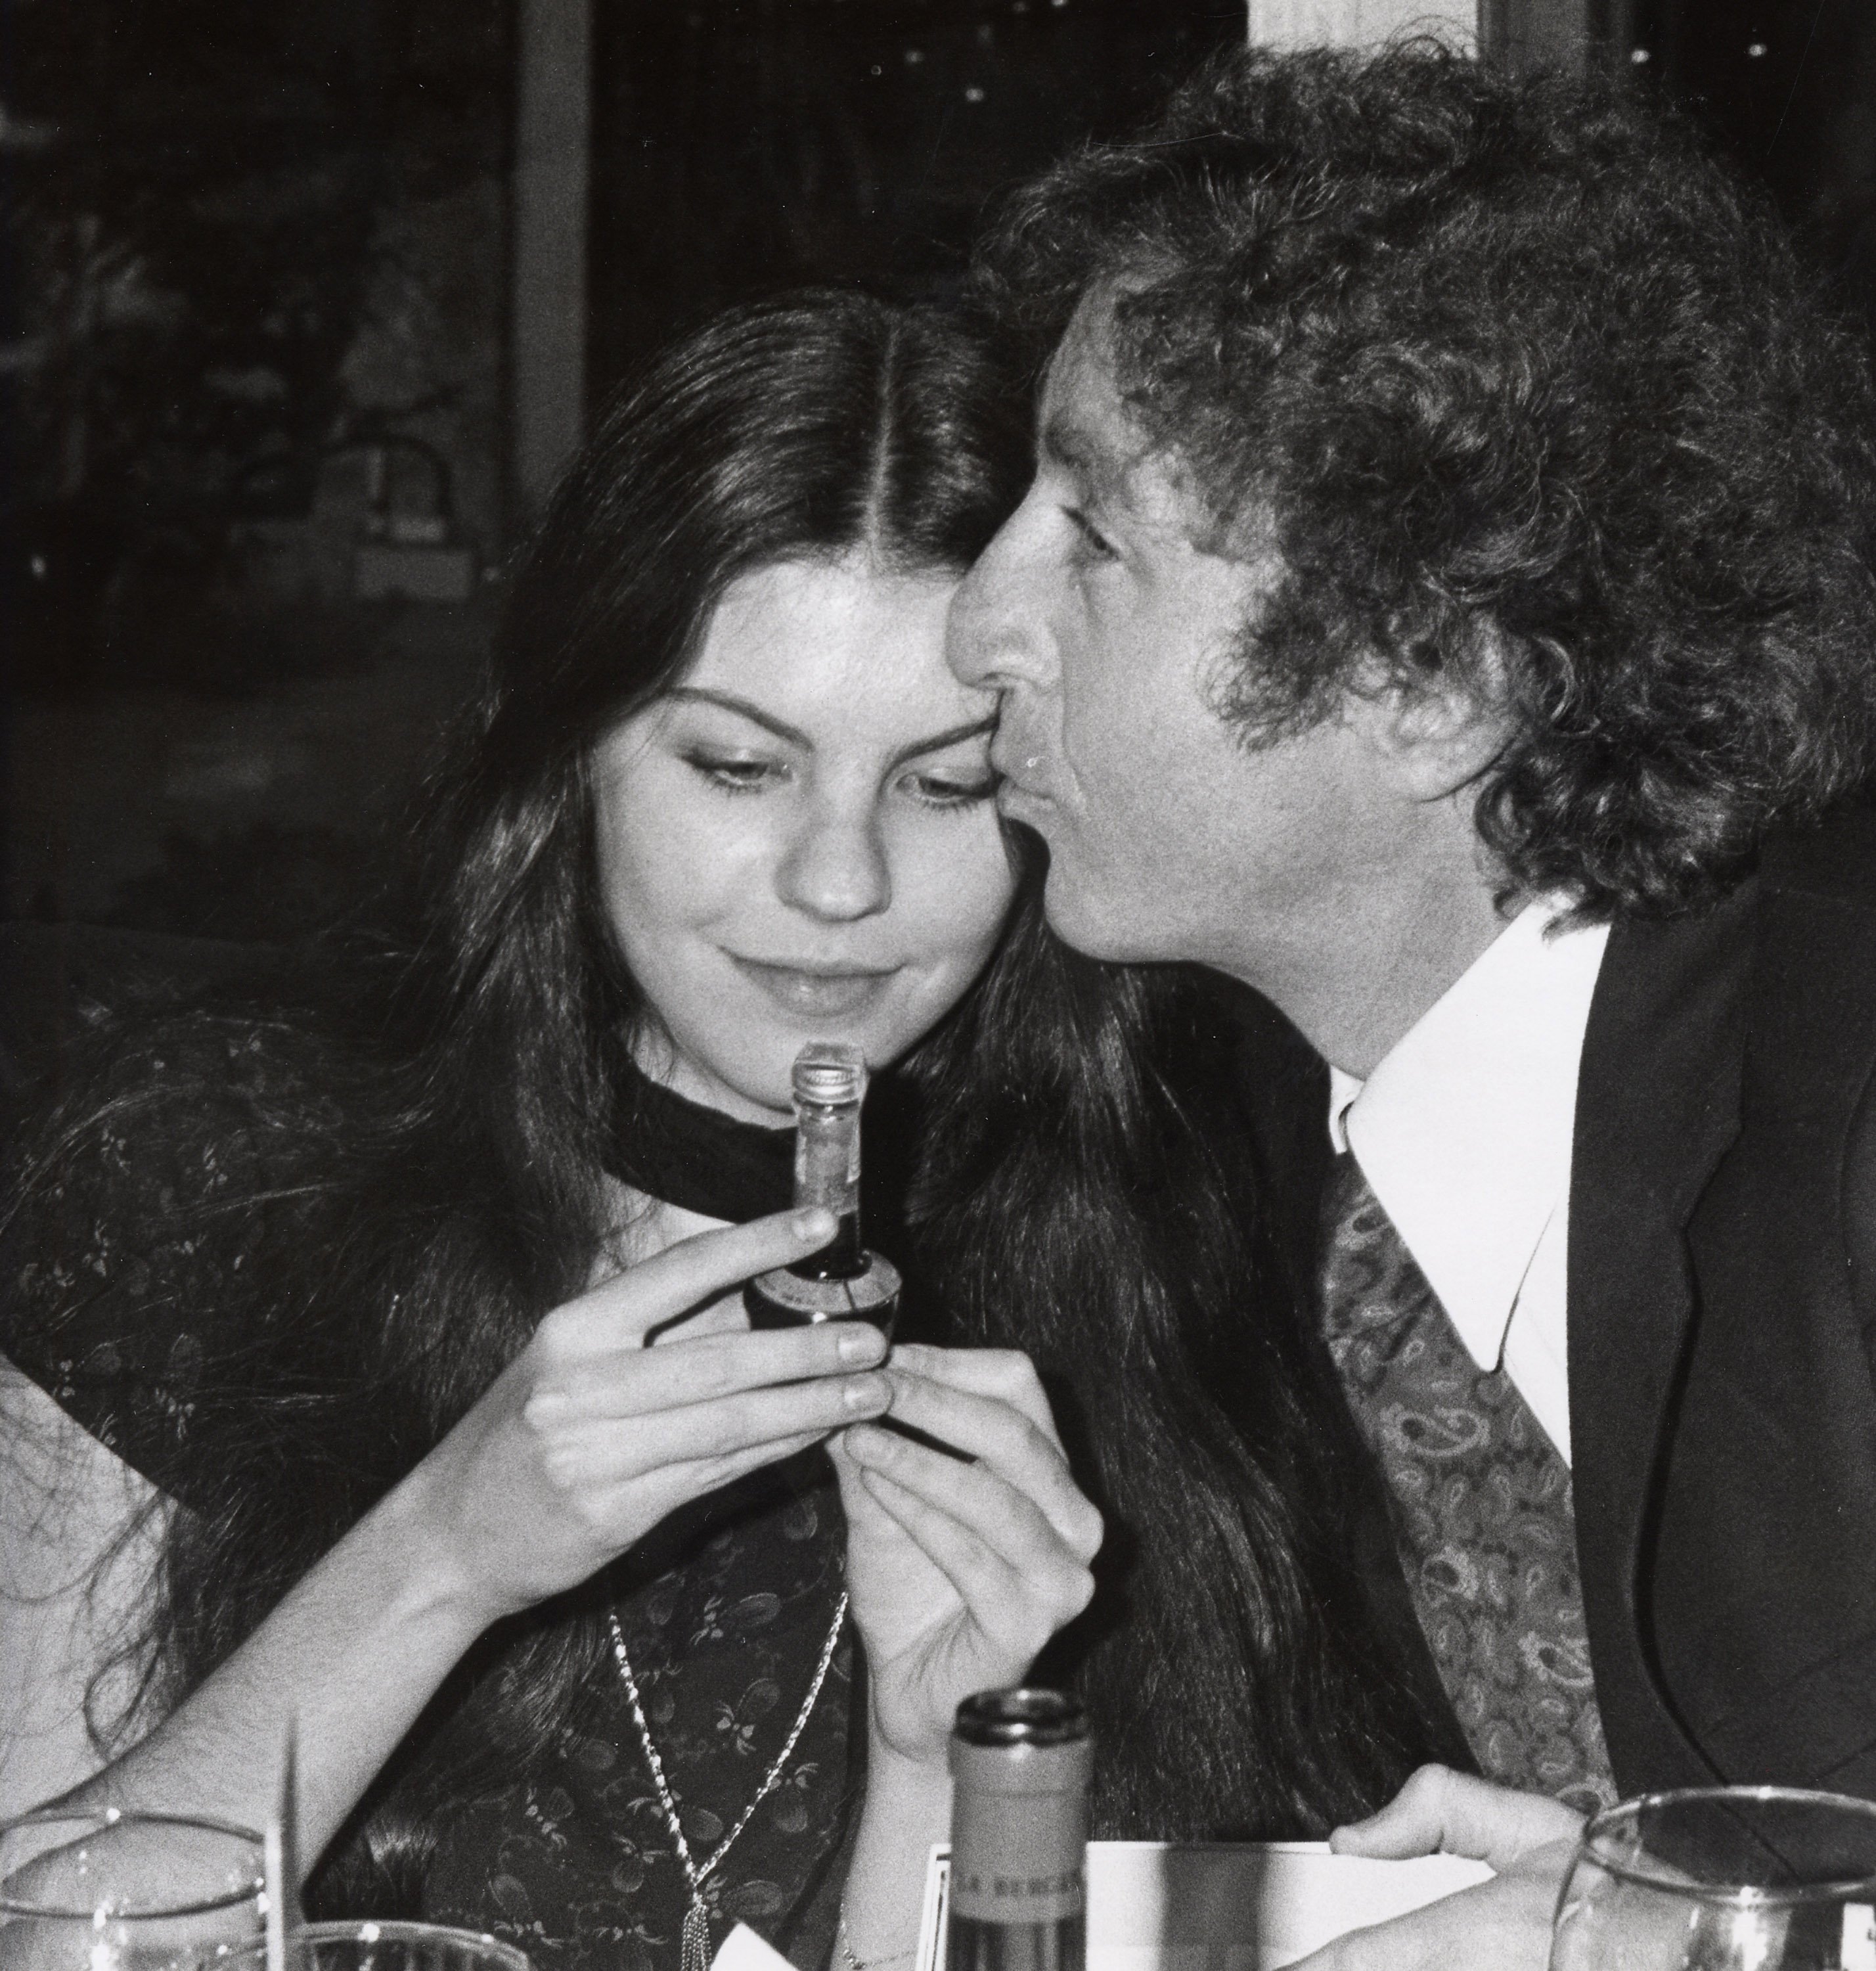 Katherine Wilder and Gene Wilder attend the "Silver Streak" Premiere Party on December 7, 1976 at Tavern on the Green in New York City, New York. | Source: Getty Images